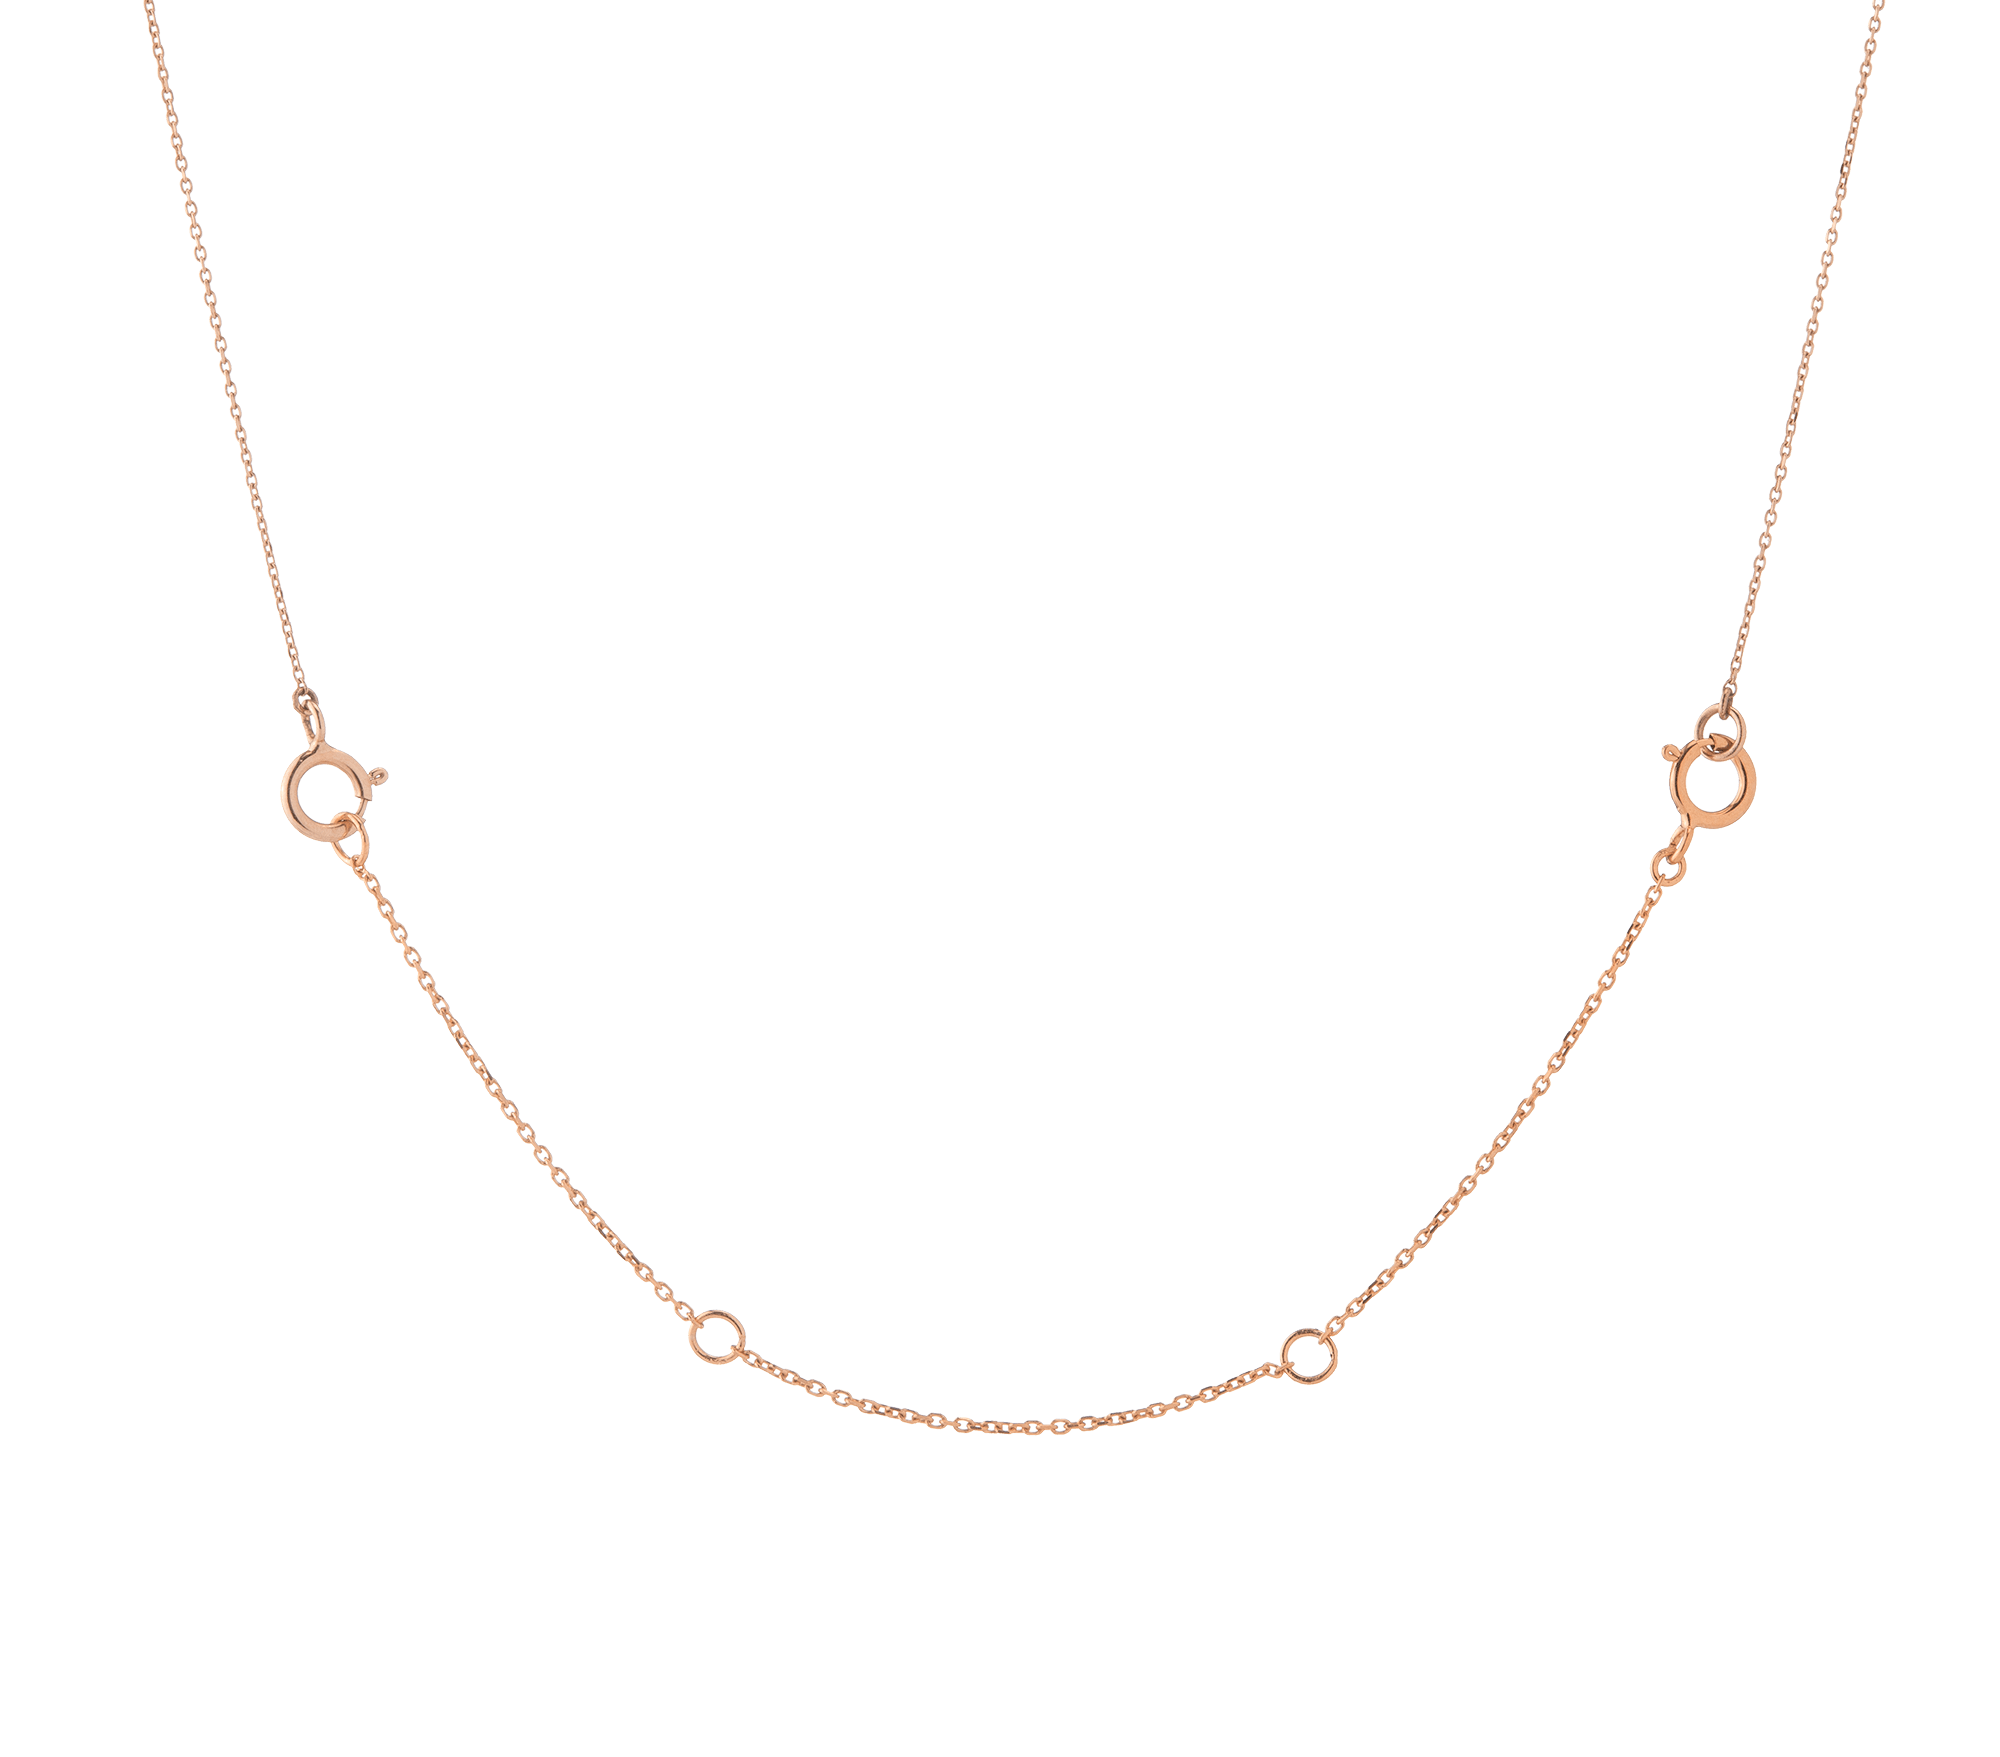 Adjustable Chain and Necklace Extender 5cm/2' in 18k Rose Gold Vermeil On  Sterling Silver